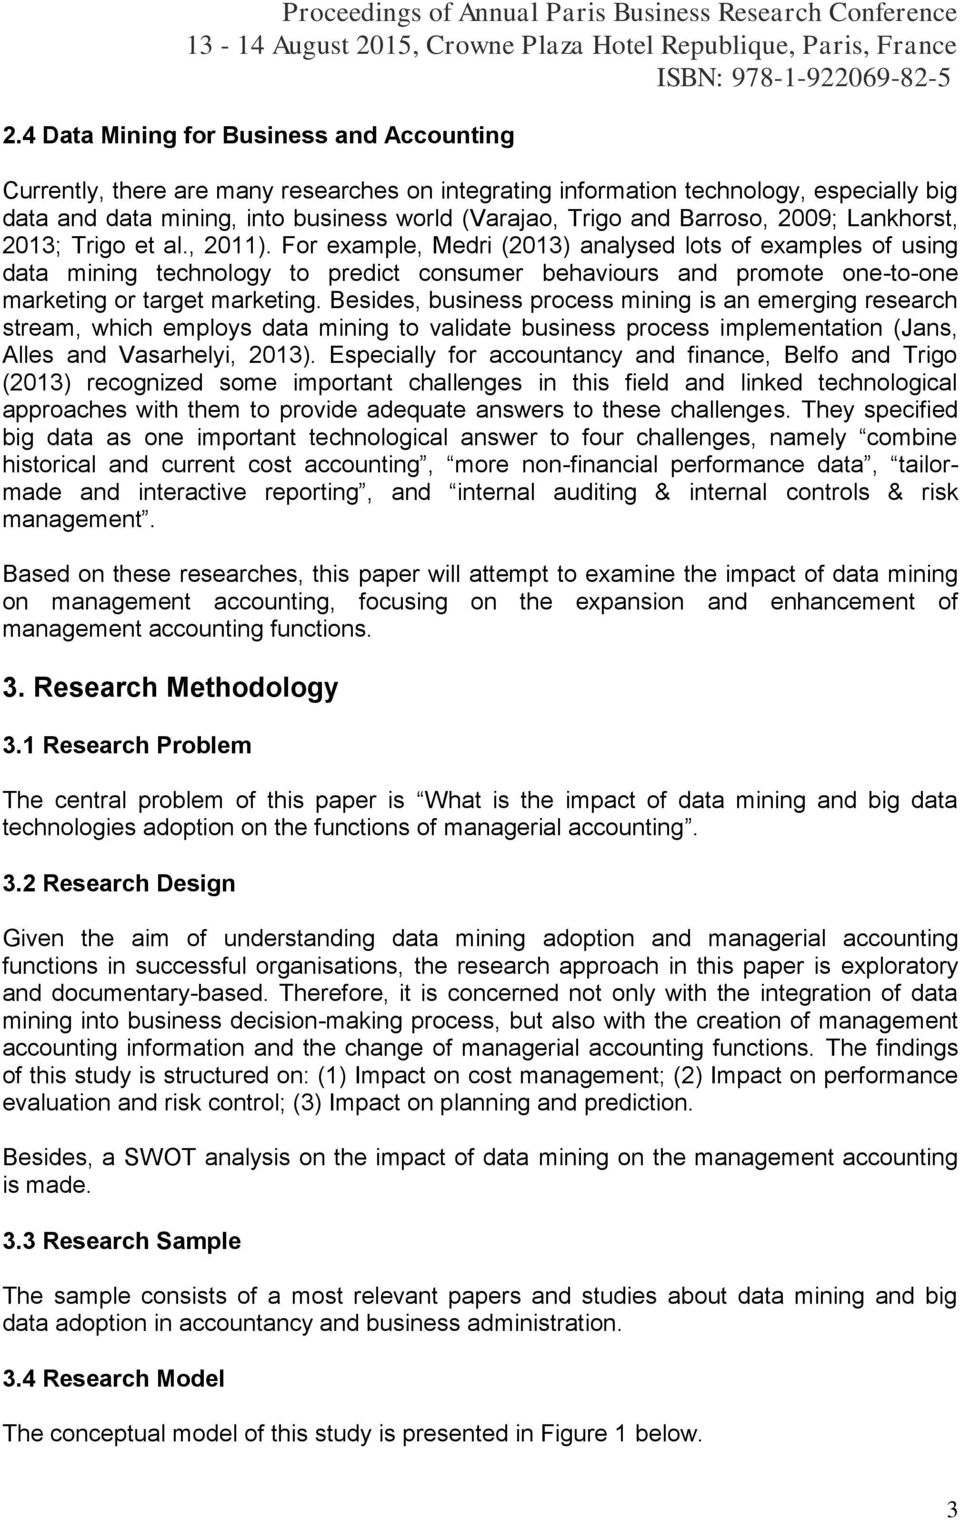 Data Ning Research Papers In Computer Science Ieee Pdf Grin intended for Er Diagram Yahoo Answers